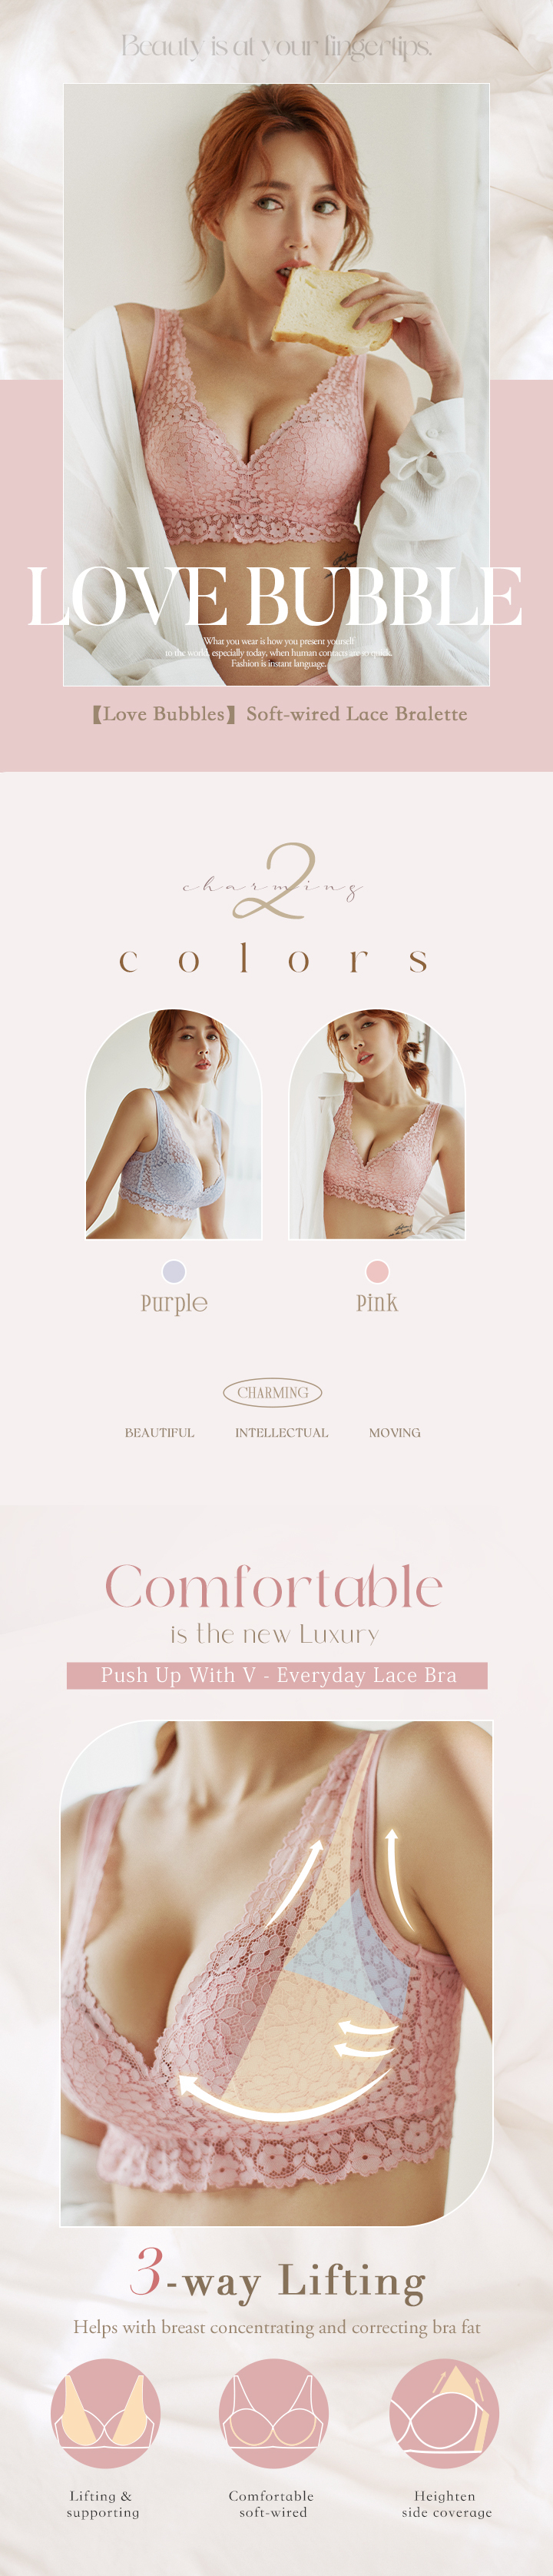 Love Bubbles】Soft-wired Lace Bralette (Pink)